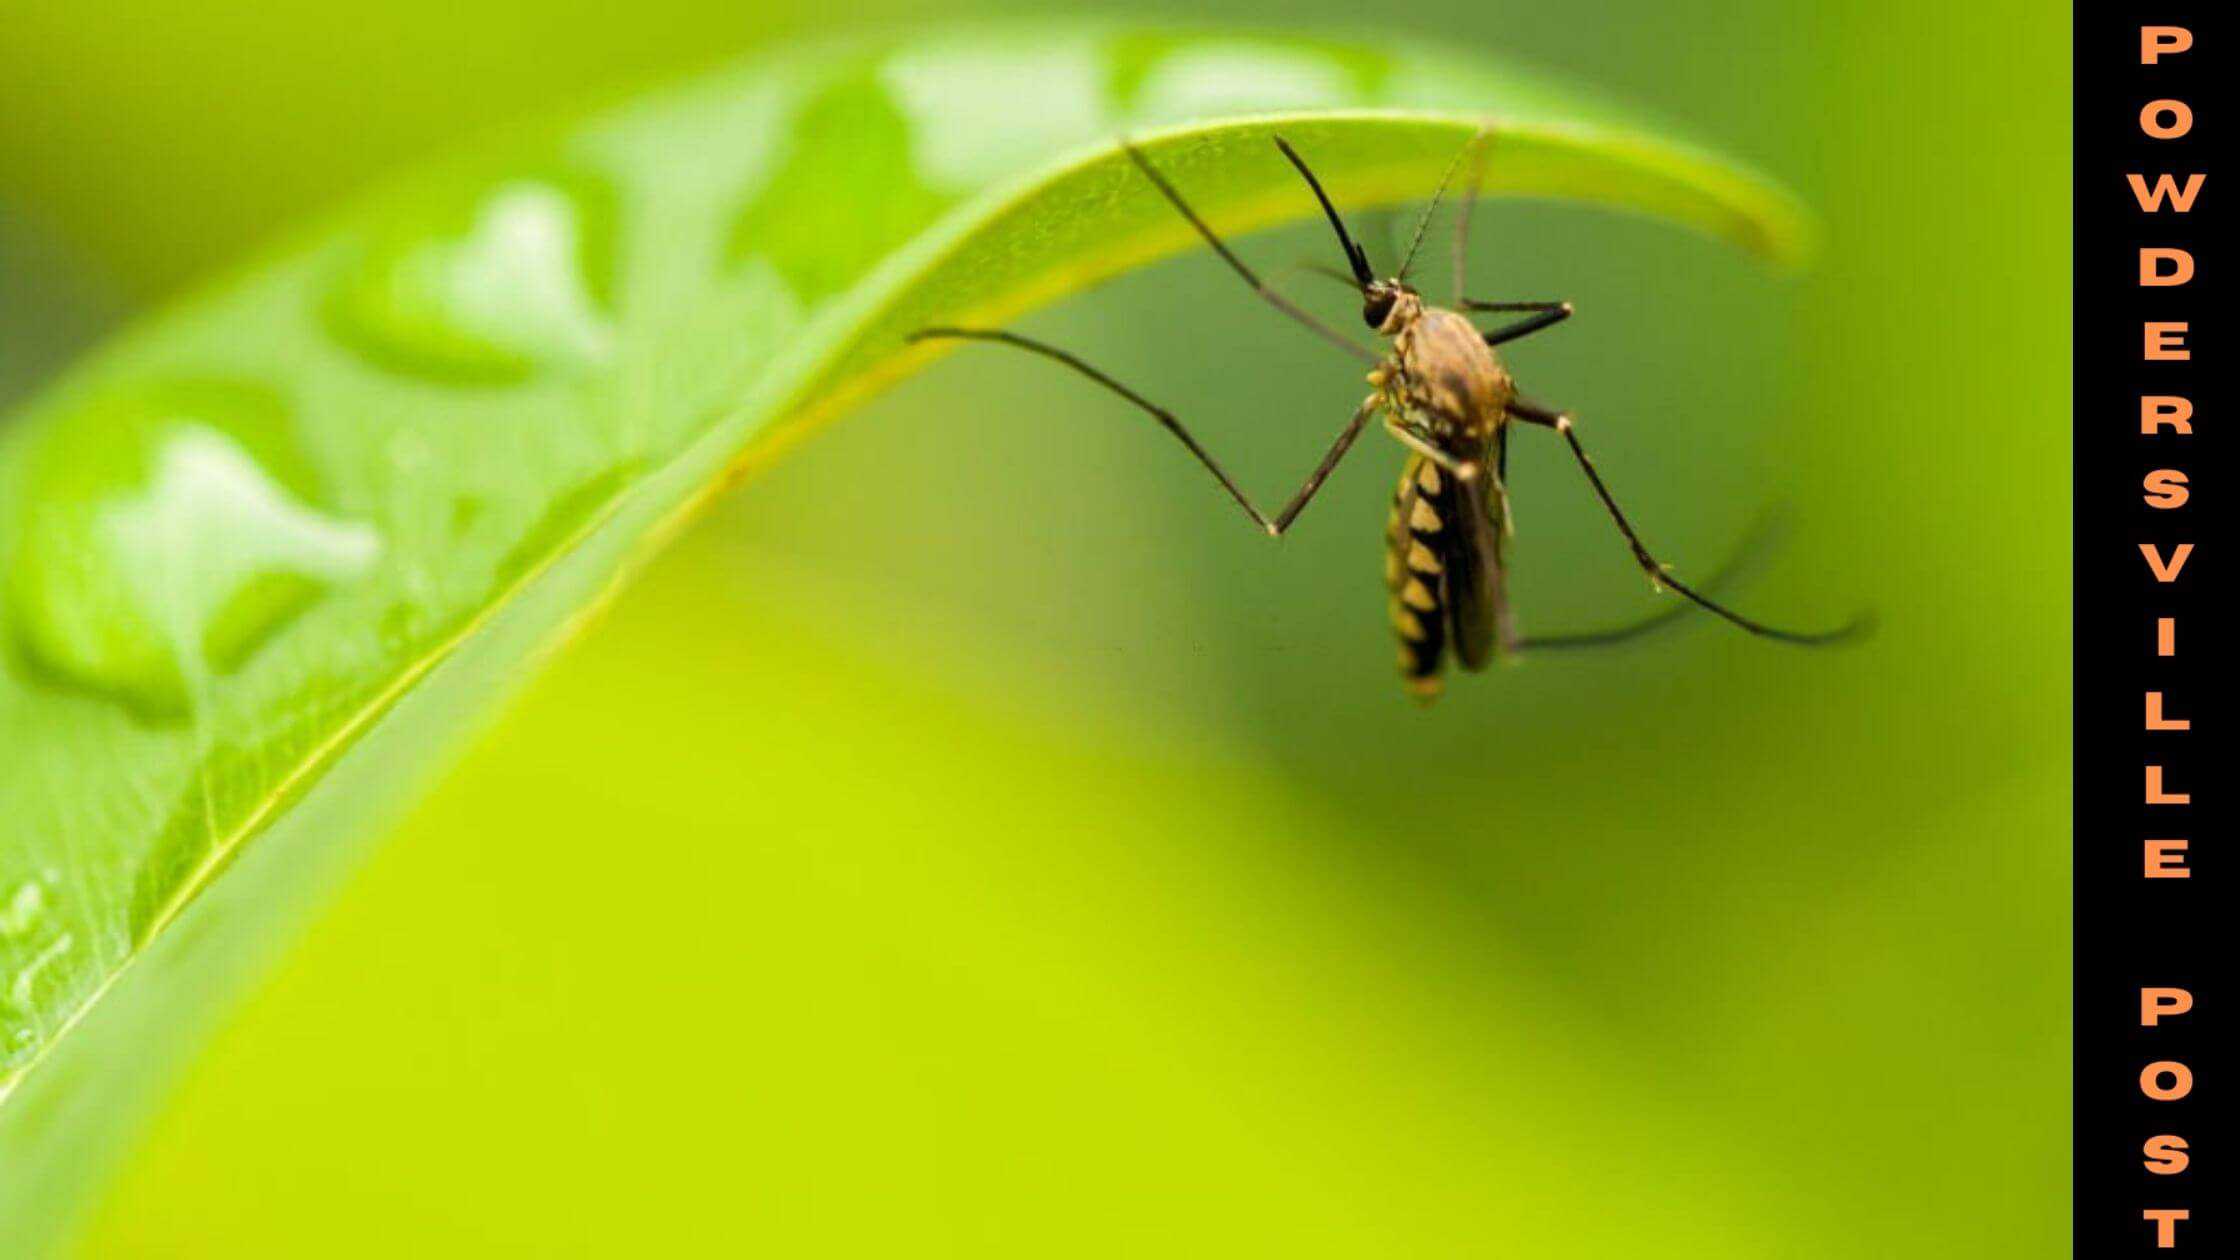 Mosquito Vision Could Help In Hiding From Disease Vectors!